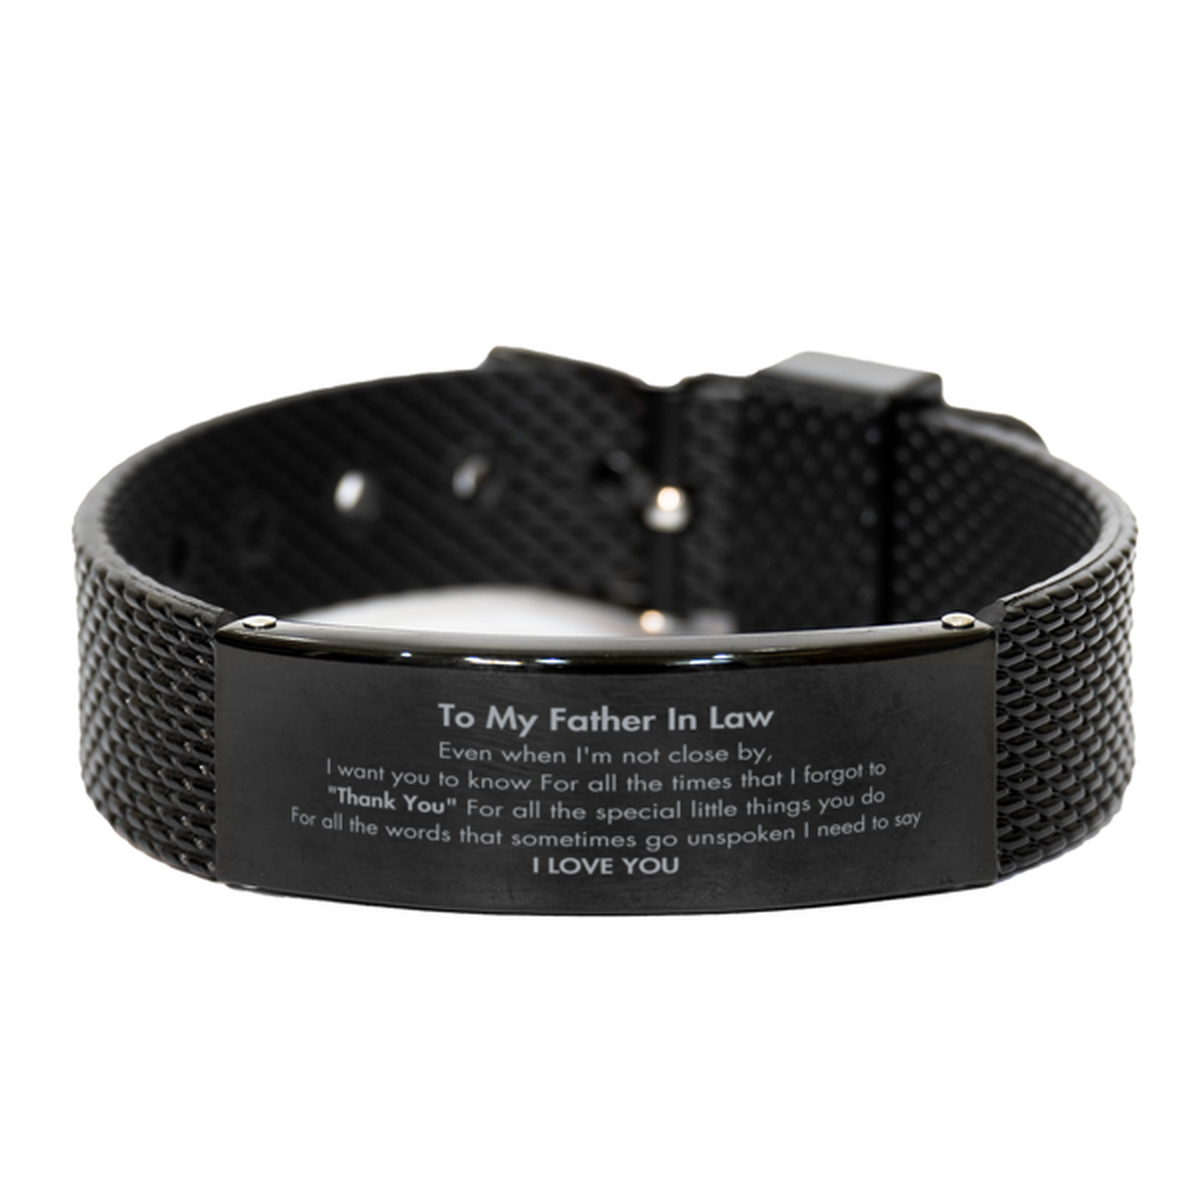 Thank You Gifts for Father In Law, Keepsake Black Shark Mesh Bracelet Gifts for Father In Law Birthday Mother's day Father's Day Father In Law For all the words That sometimes go unspoken I need to say I LOVE YOU